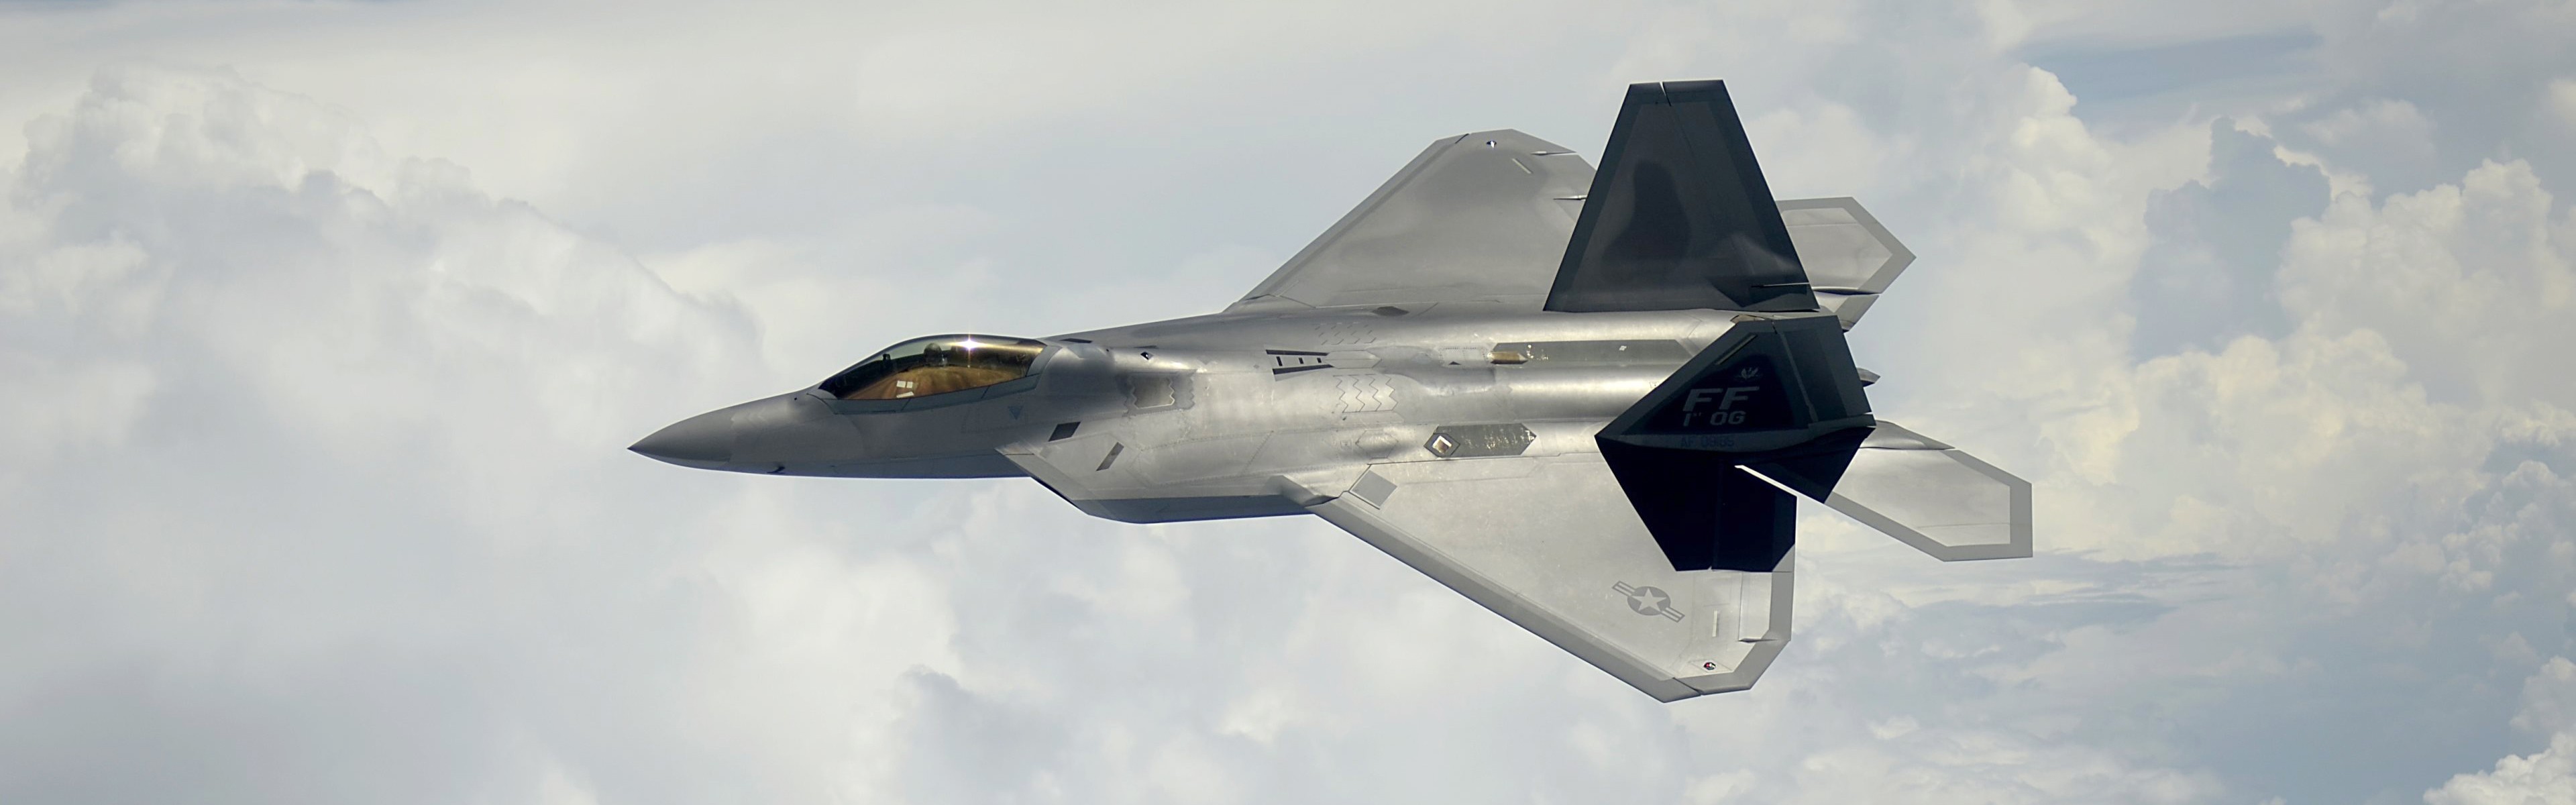 F 22 Raptor, Military aircraft, Aircraft, Jet fighter, US Air Force, Dual monitors, Multiple display Wallpaper